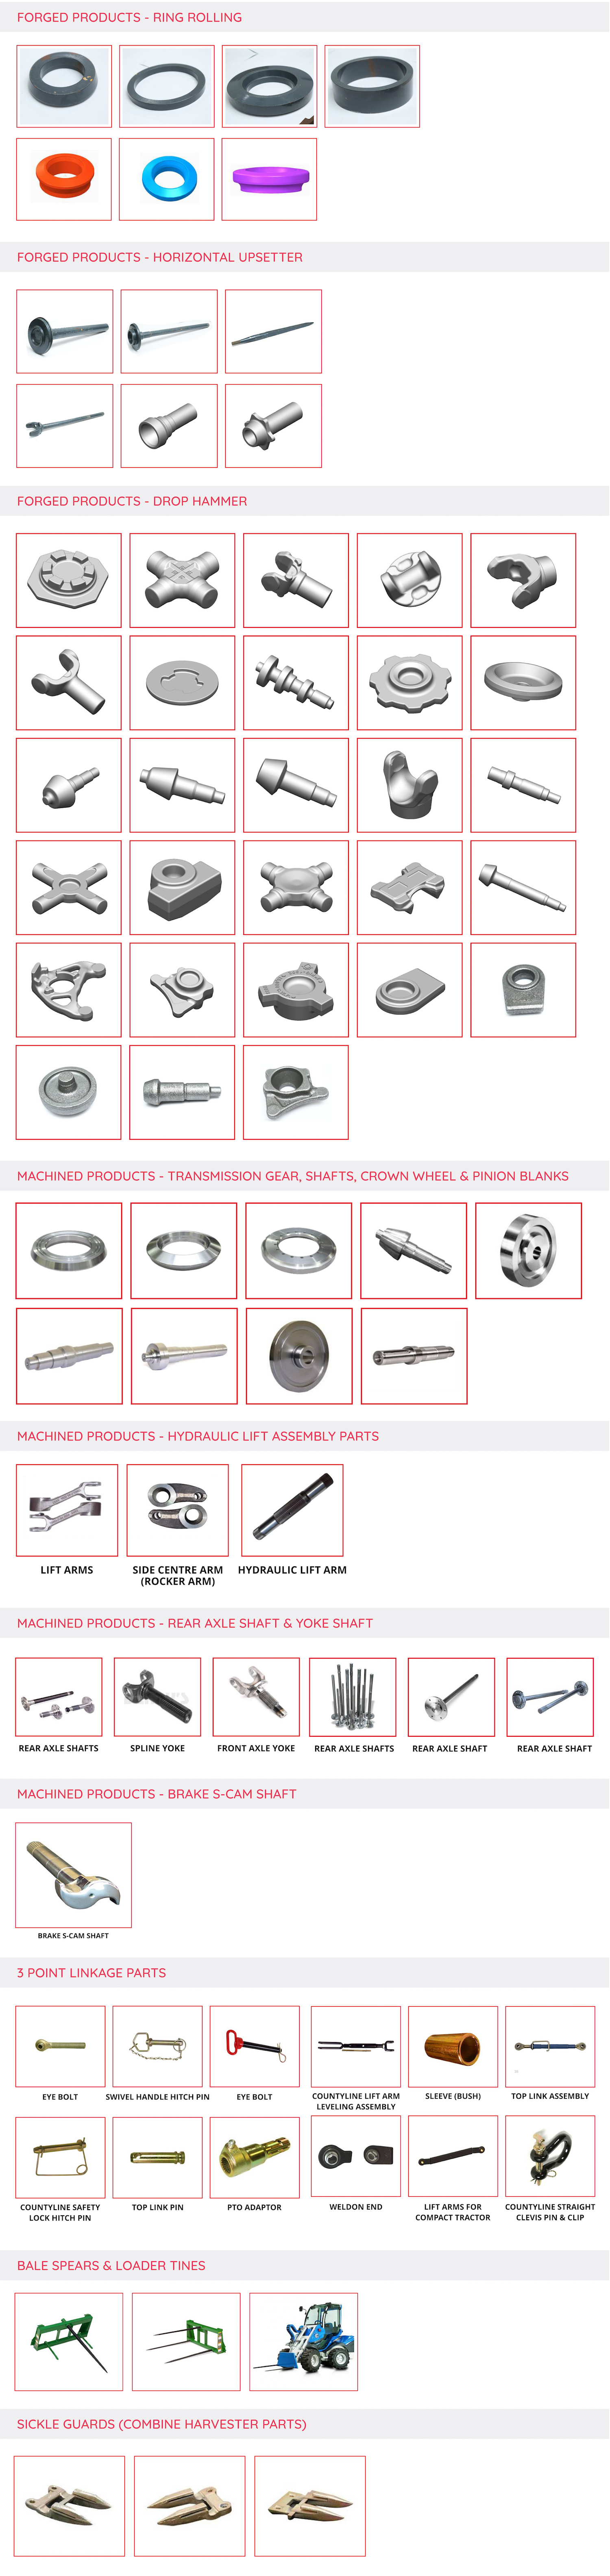 KNL Driveline - Forged & Machined Component Manufacturers in Ludhiana, Punjab